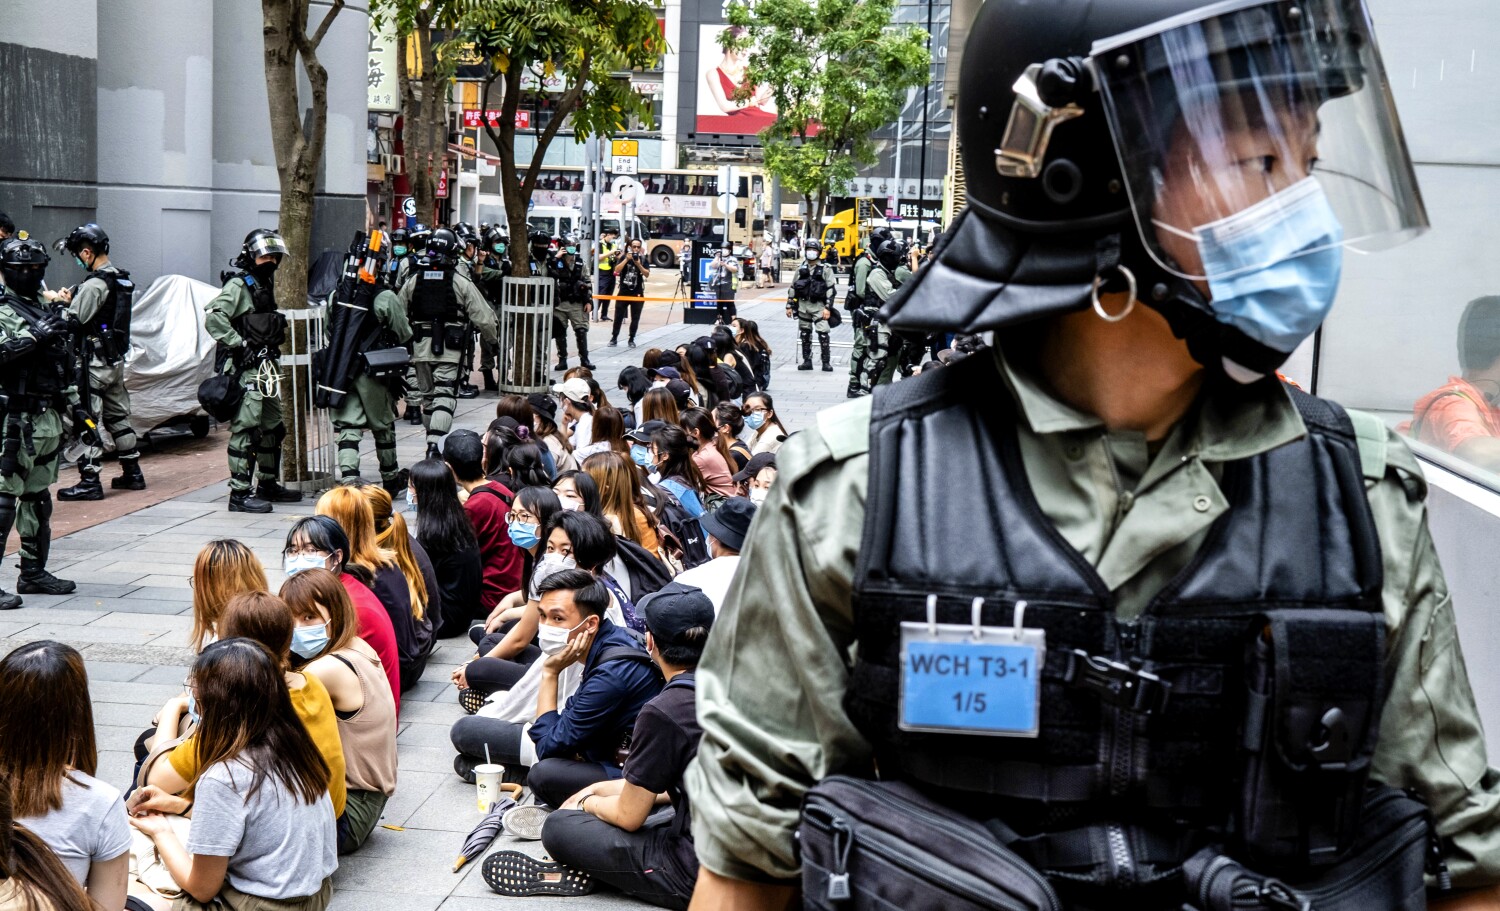 Hong Kong's arrested protesters now face years of fear and limbo